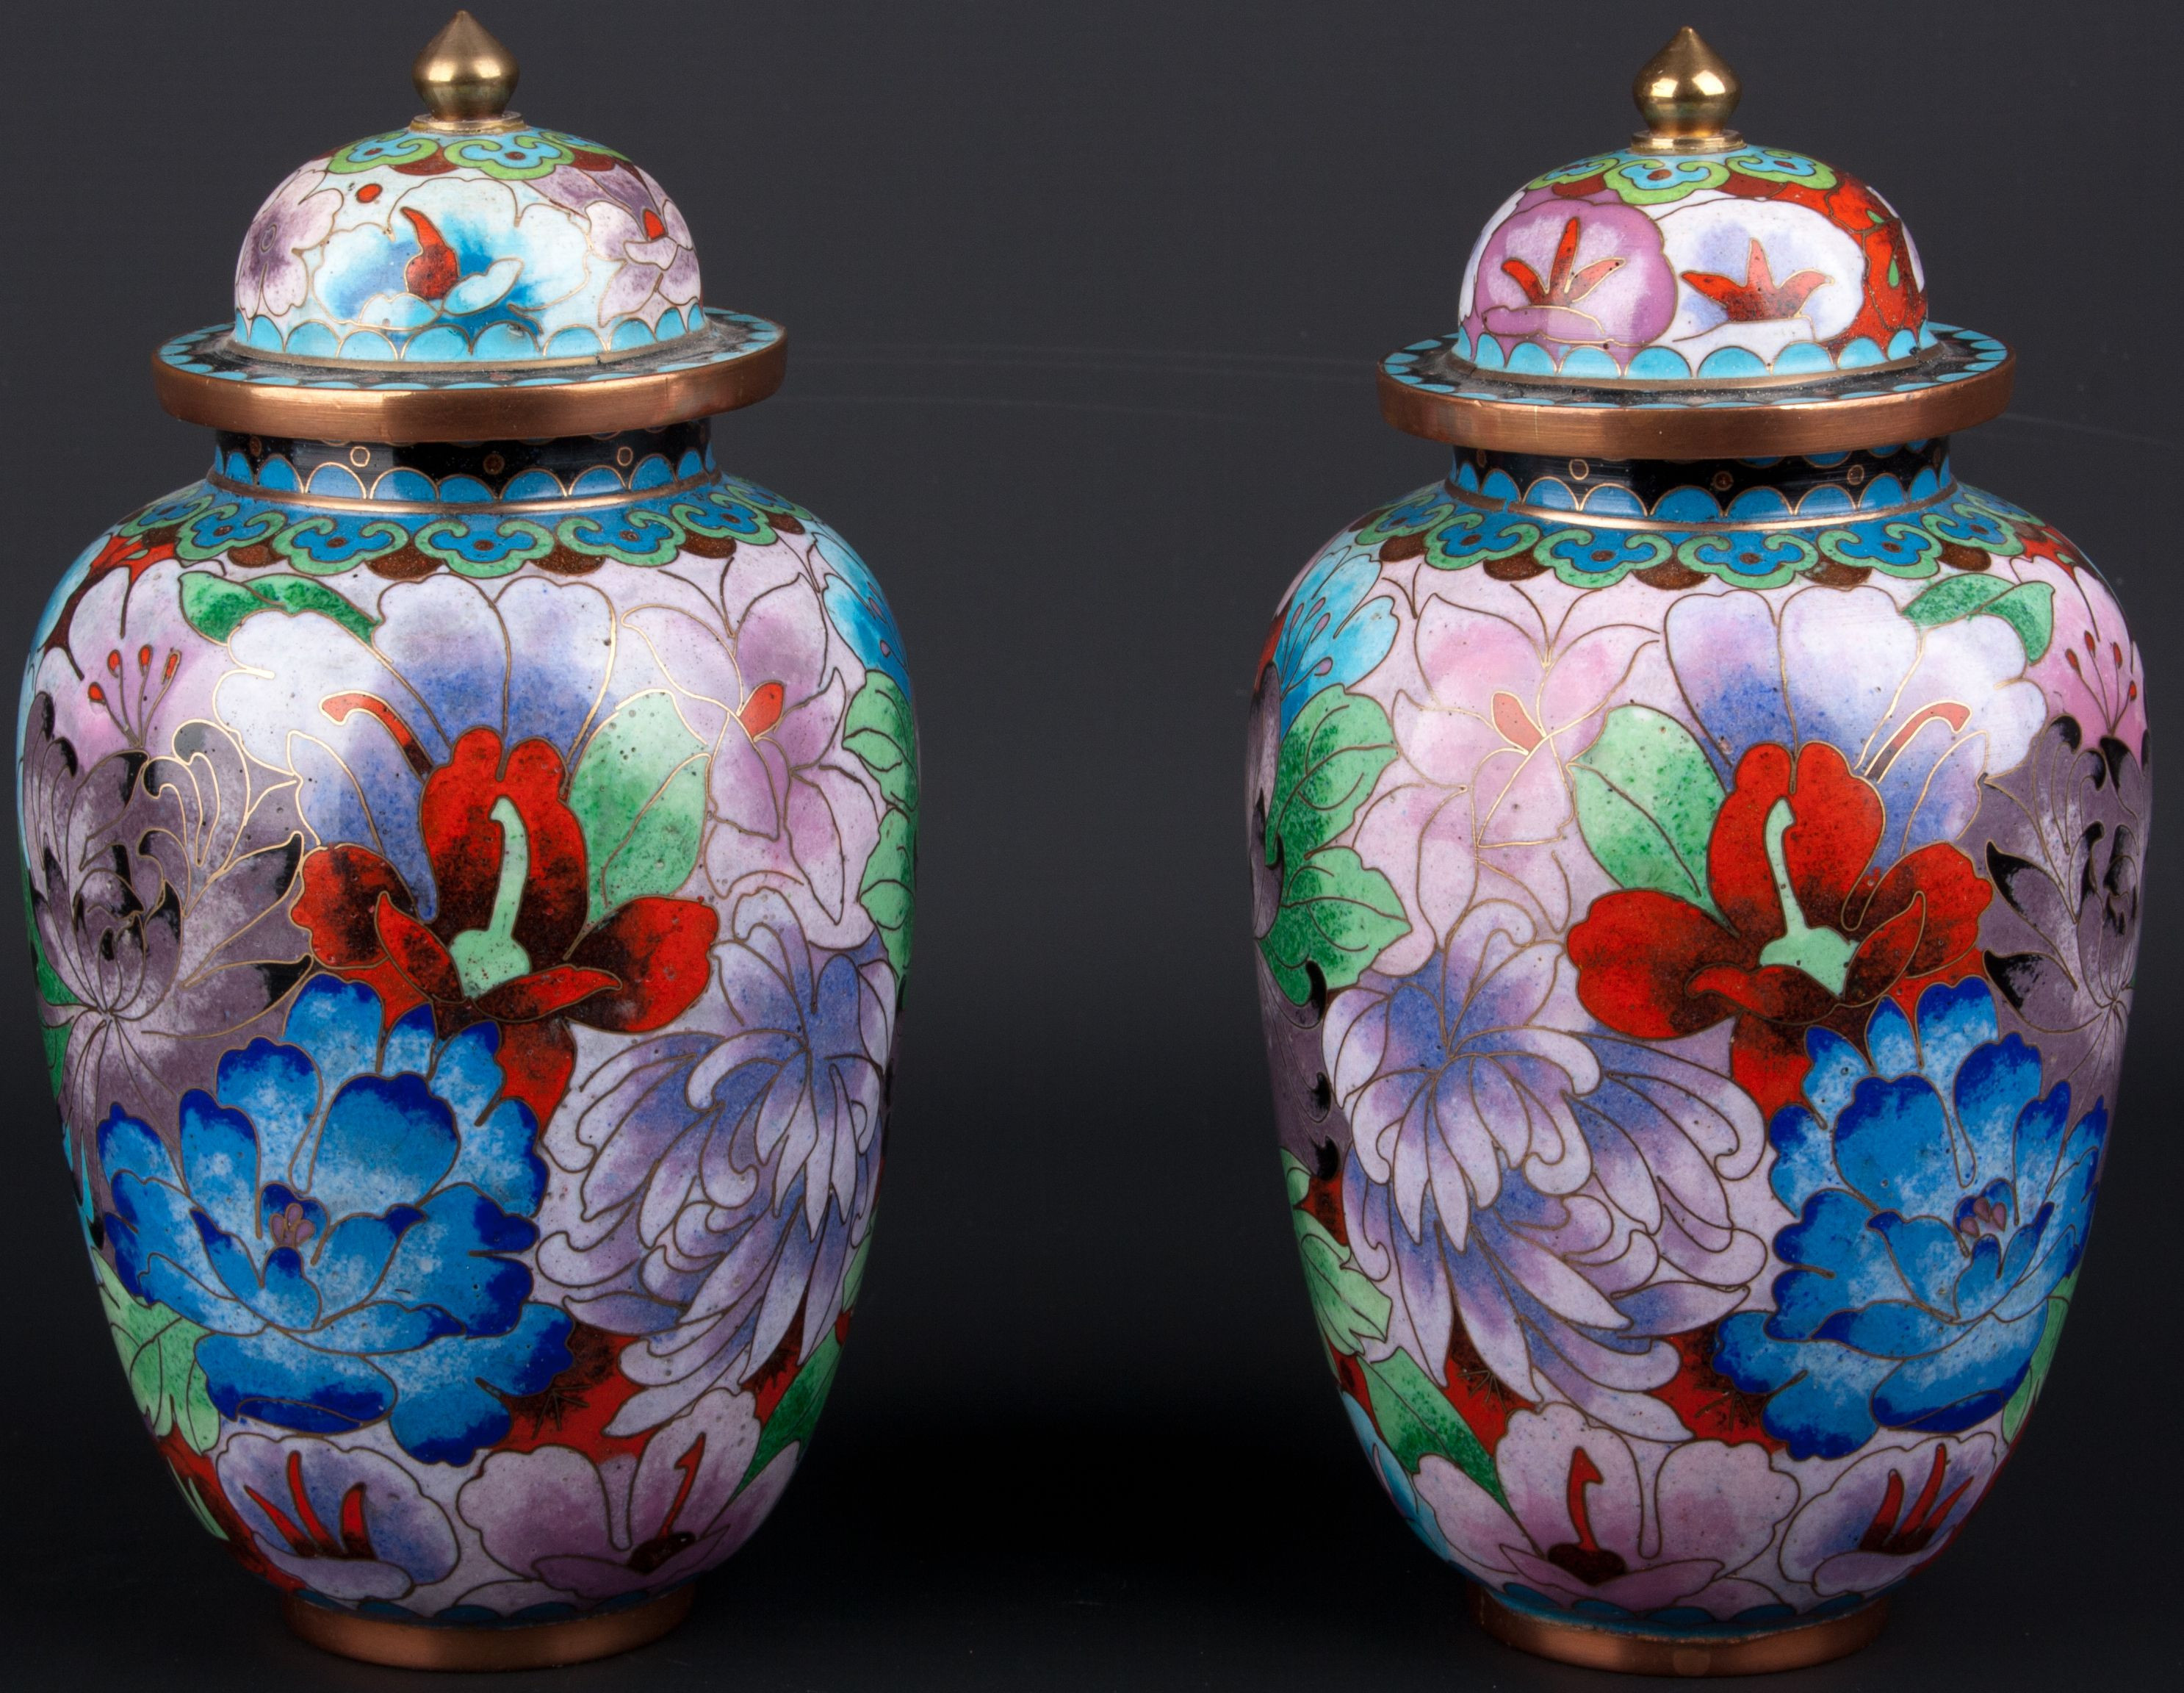 28 Great Pair Of Chinese Cloisonne Vases 2024 free download pair of chinese cloisonne vases of description a small pair of chinese cloisonne enamel vases covers pertaining to description a small pair of chinese cloisonne enamel vases covers brightly 